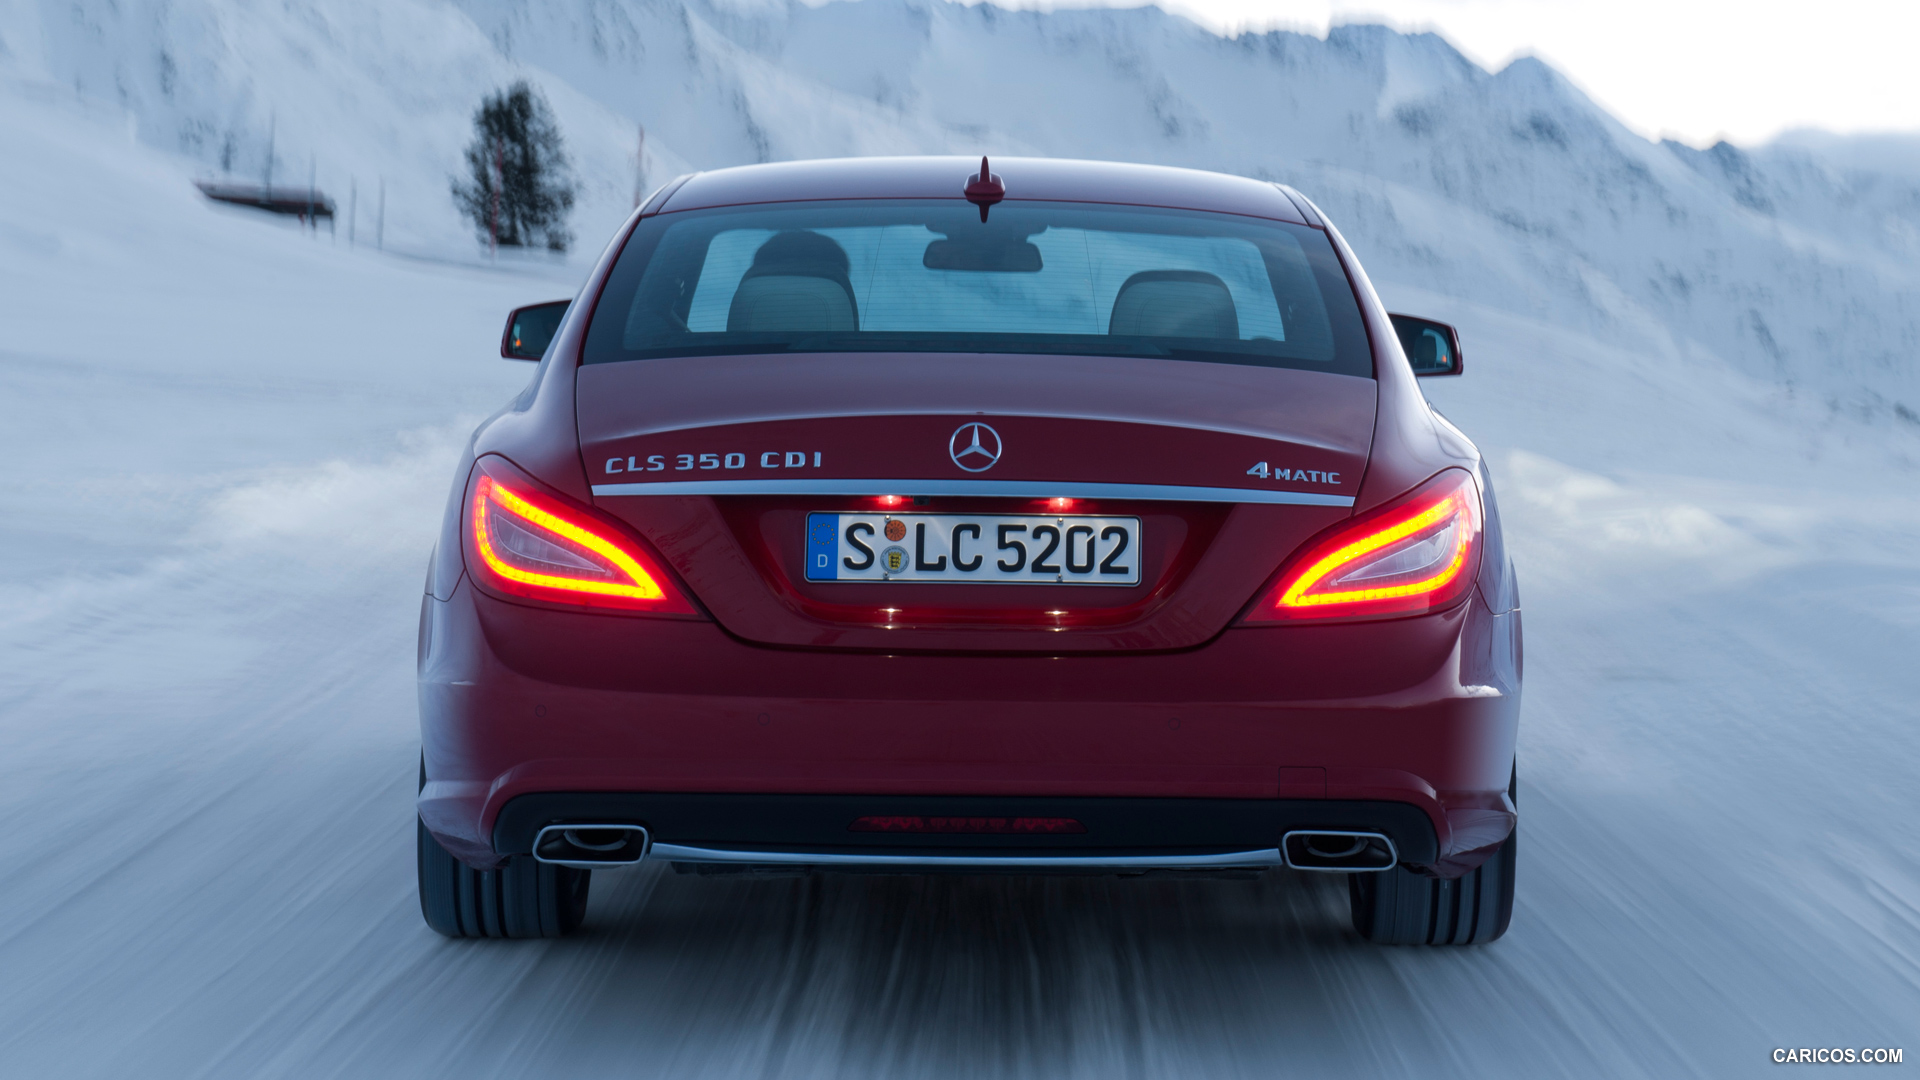 Mercedes-Benz CLS350 CDI 4MATIC (2012)  - Rear Angle , #7 of 15